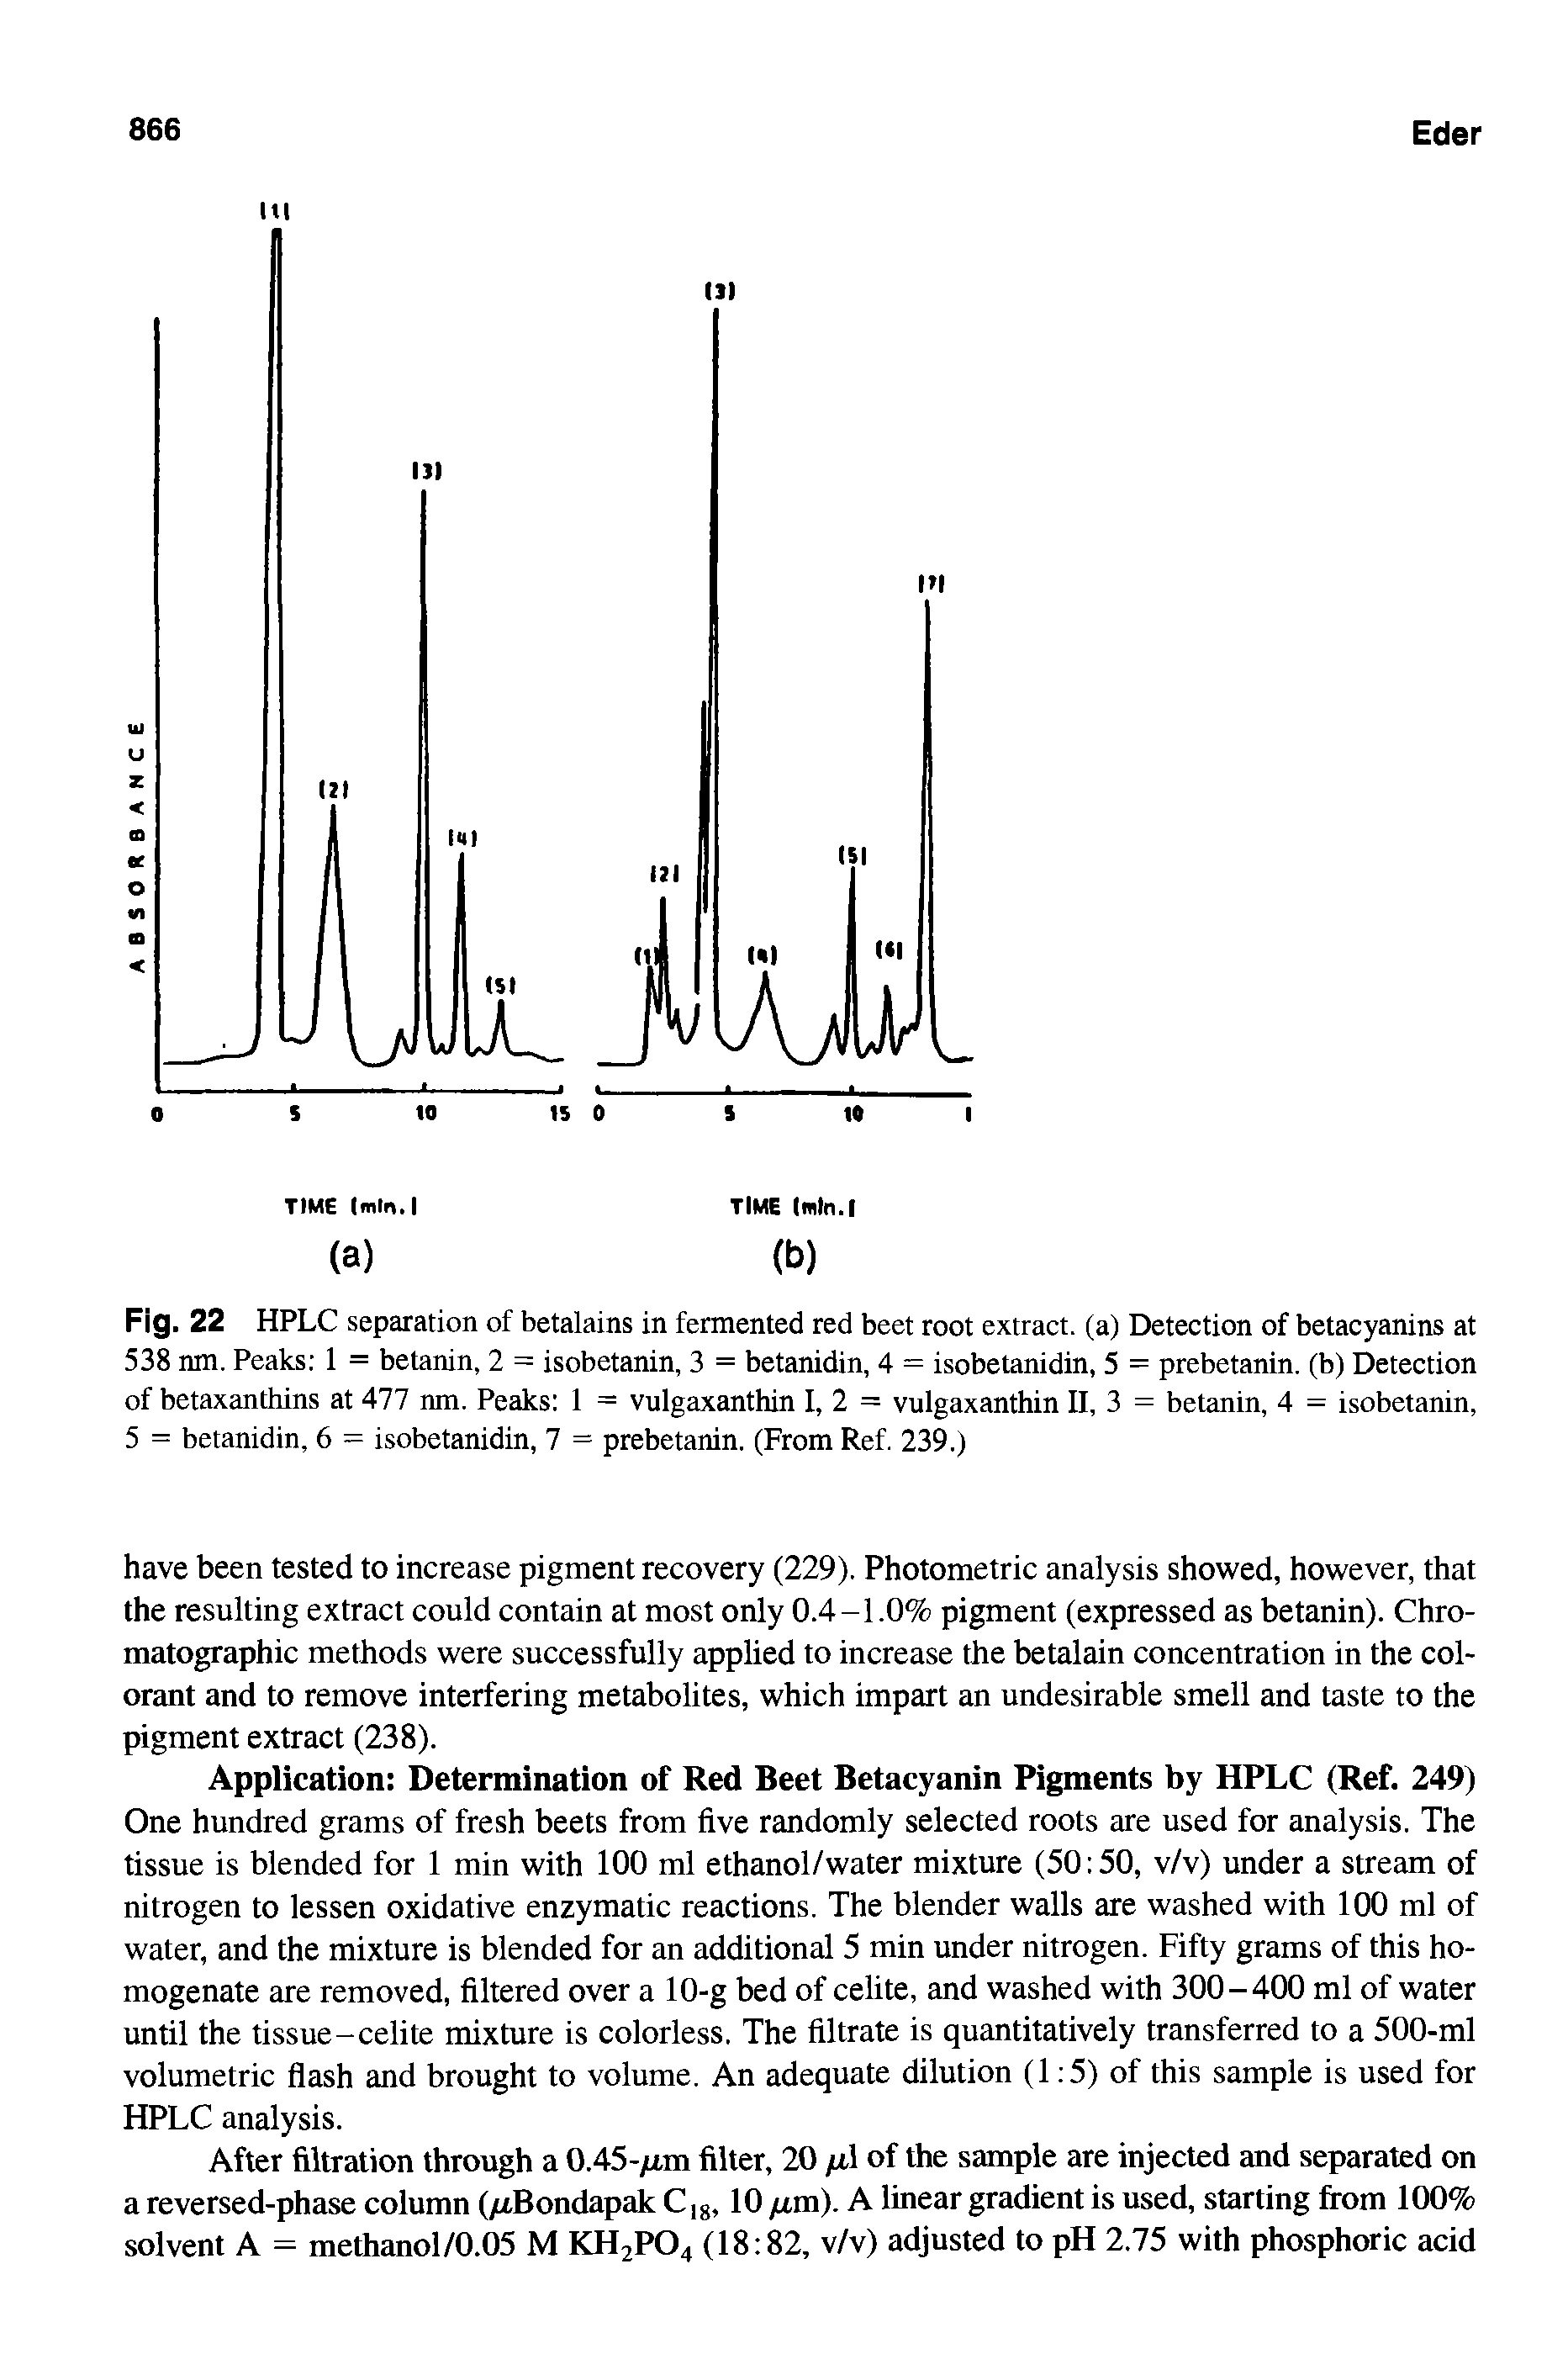 Fig. 22 HPLC separation of betalains in fermented red beet root extract, (a) Detection of betacyanins at 538 nm. Peaks 1 = betanin, 2 = isobetanin, 3 = betanidin, 4 = isobetanidin, 5 = prebetanin. (b) Detection of betaxanthins at 477 nm. Peaks 1 = vulgaxanthin I, 2 = vulgaxanthin II, 3 = betanin, 4 = isobetanin, 5 = betanidin, 6 = isobetanidin, 7 = prebetanin. (From Ref. 239.)...